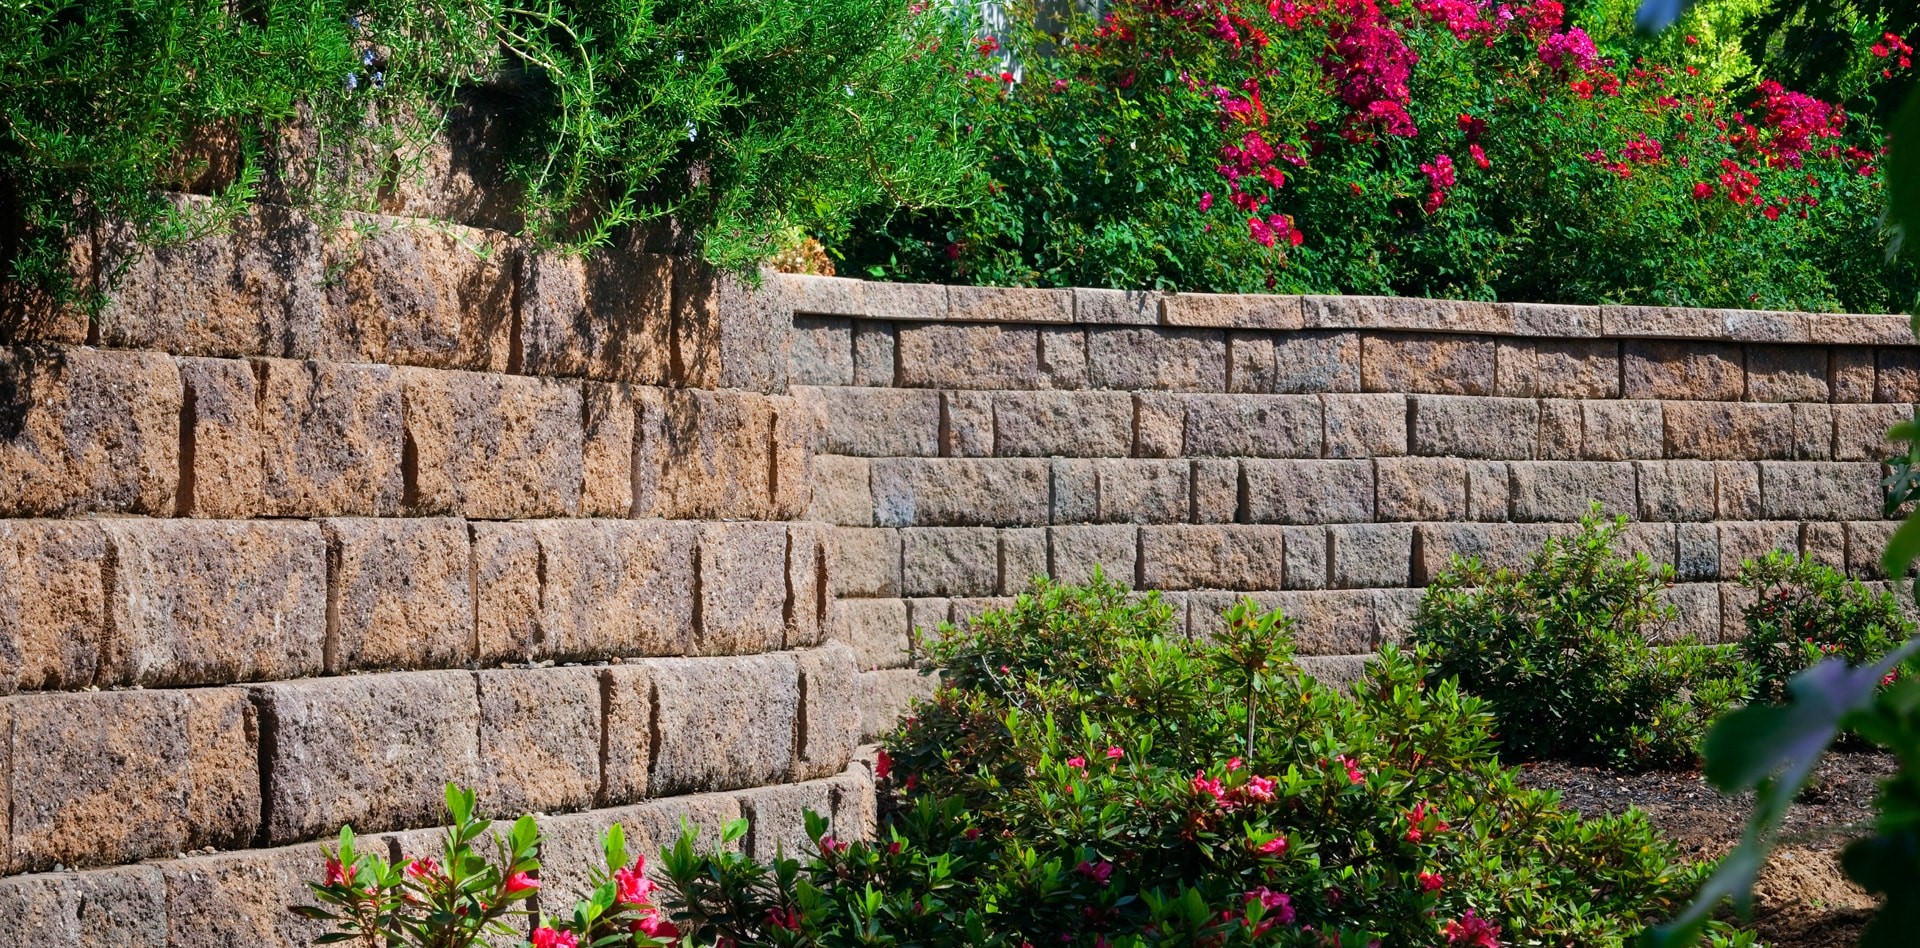 Factors to consider while choosing a paver contractor